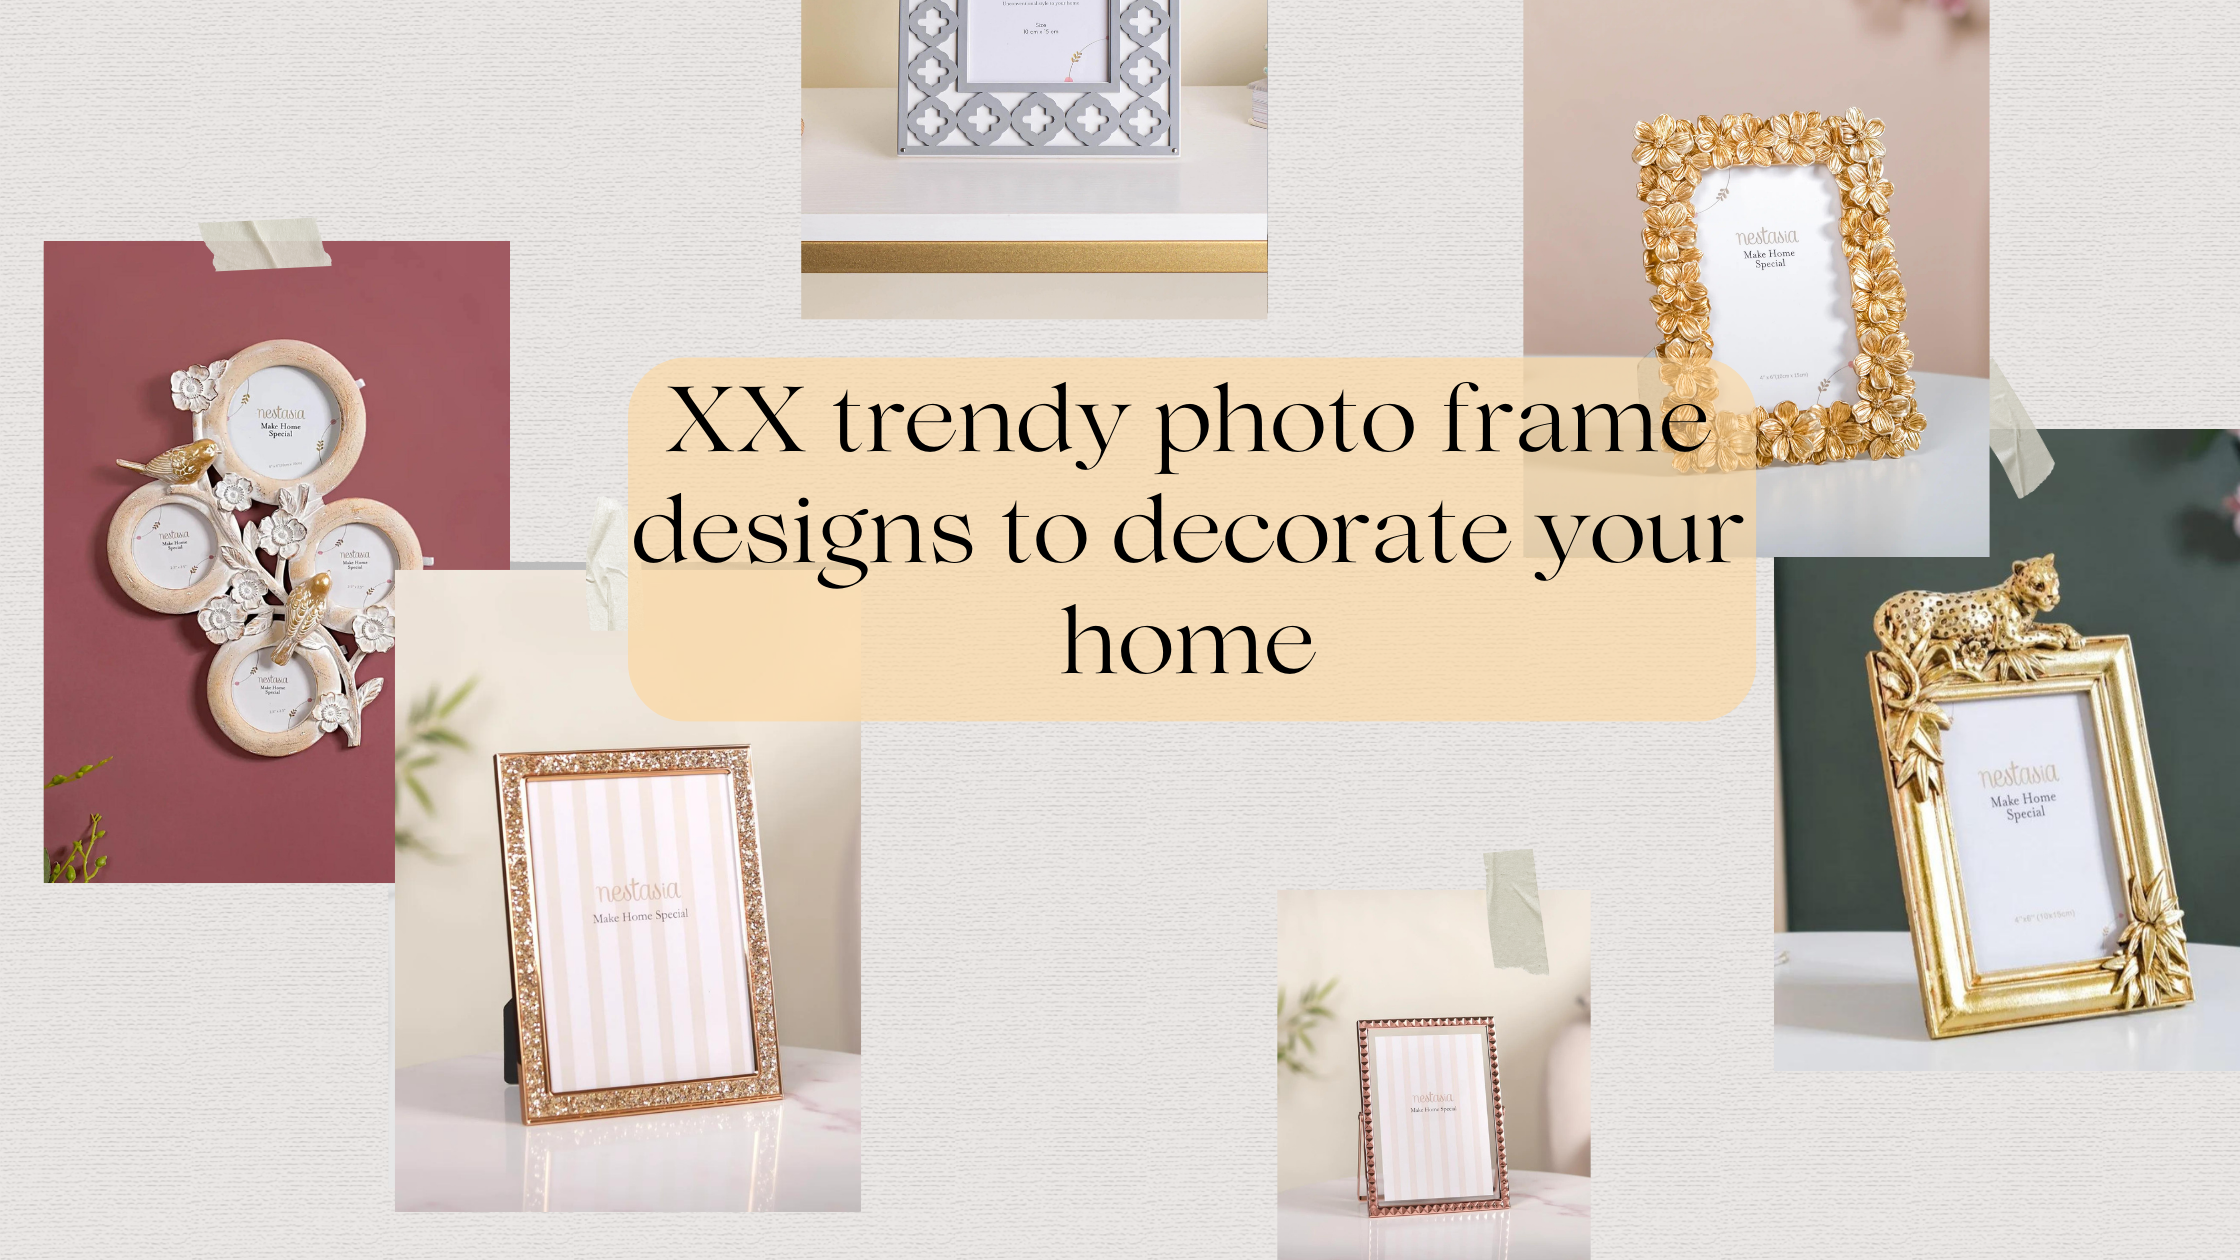 XX trendy photo frame designs to decorate your home